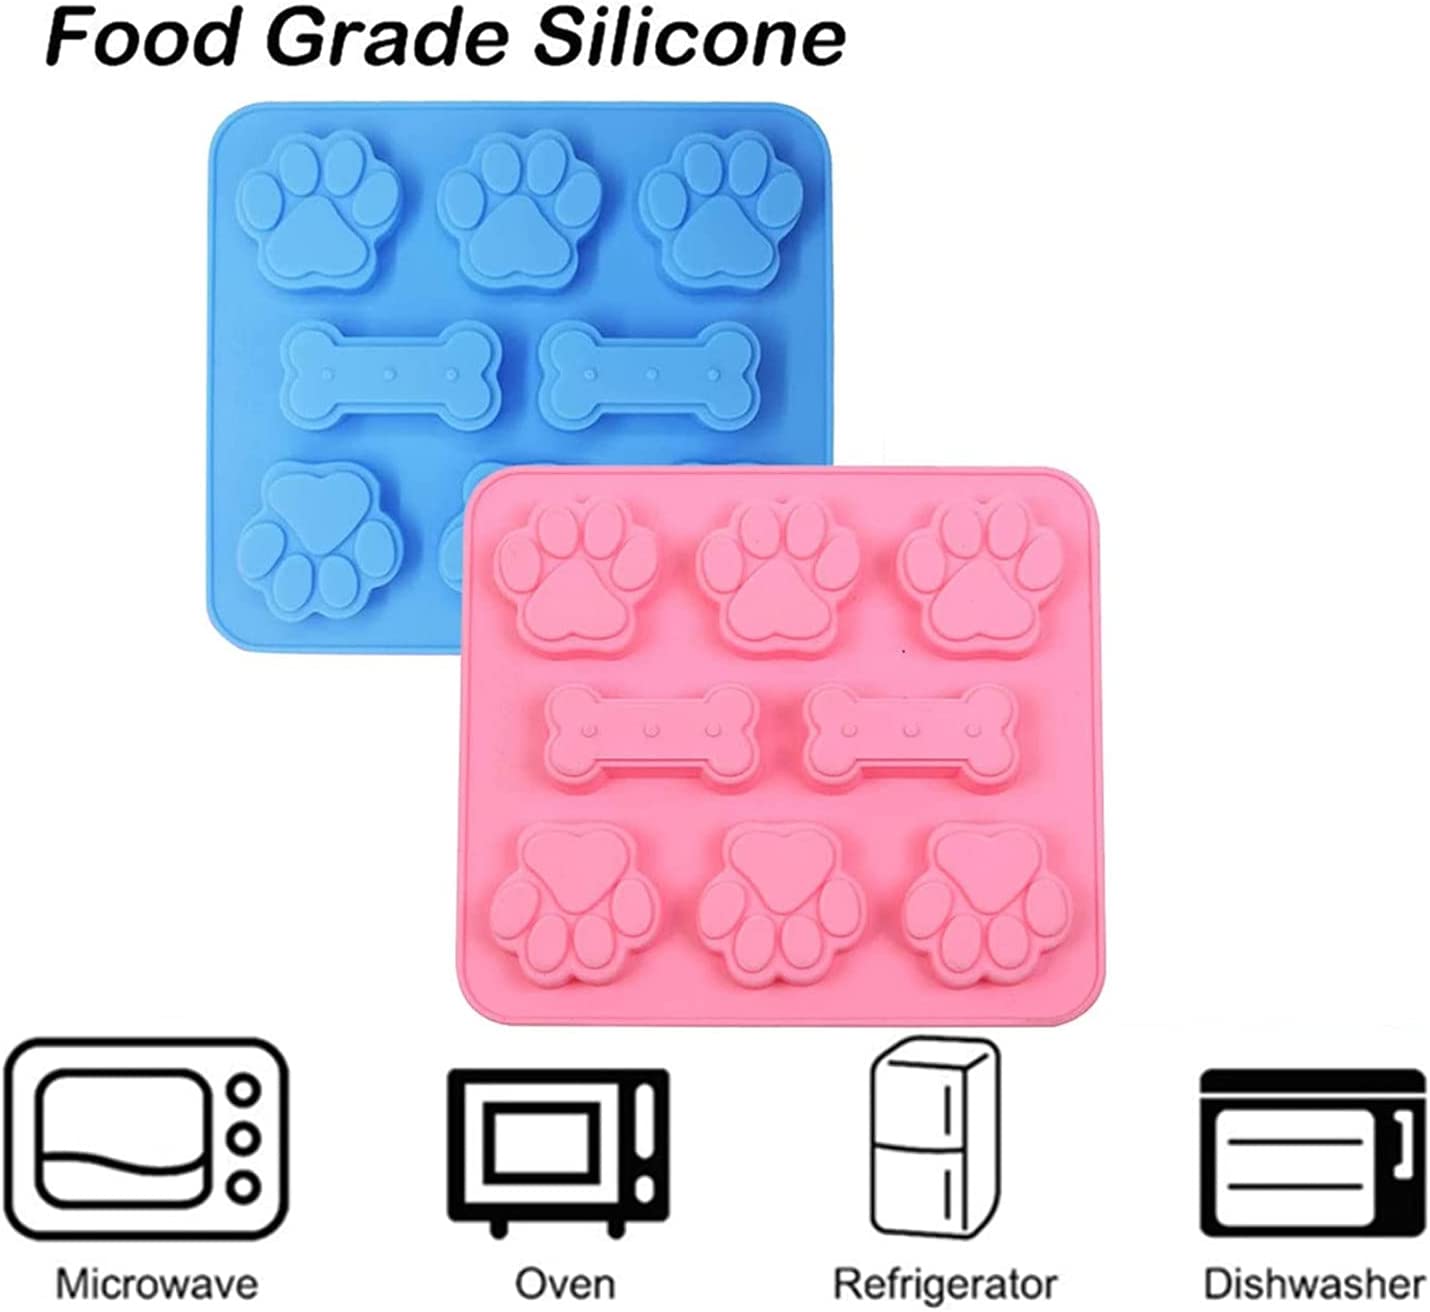 2 Pack Silicone Molds Puppy Dog Paw and Dog Bone Silicone Dog Treat Molds  for Baking Chocolate,Candy,Jelly,Ice Cube,Dog Treats 